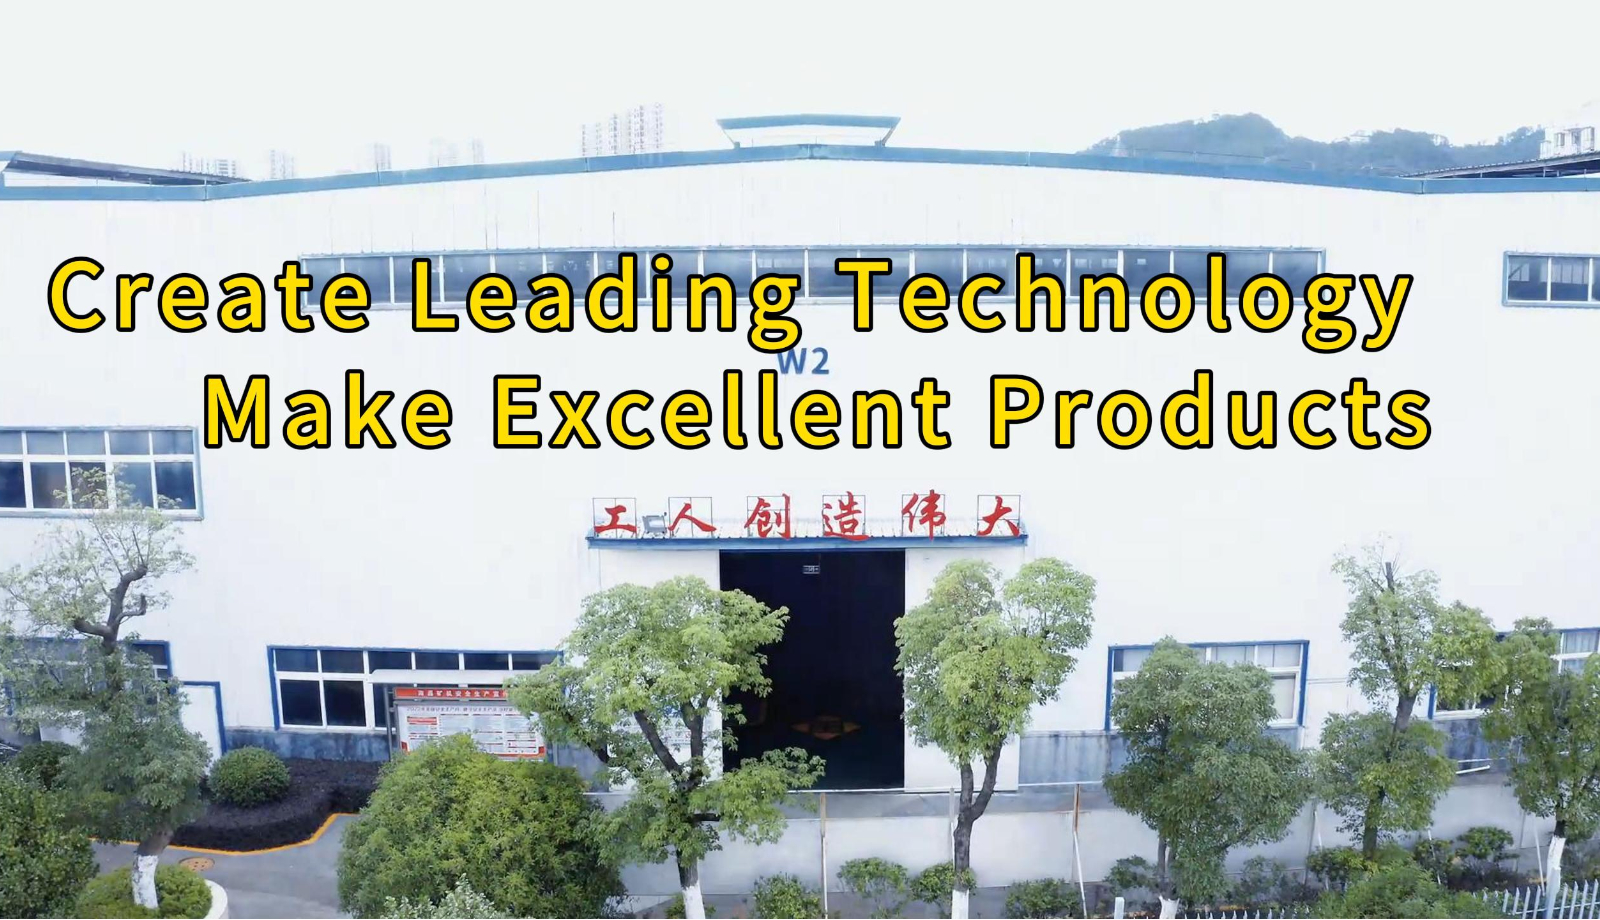 Create Leading Technology Make Excellent Products